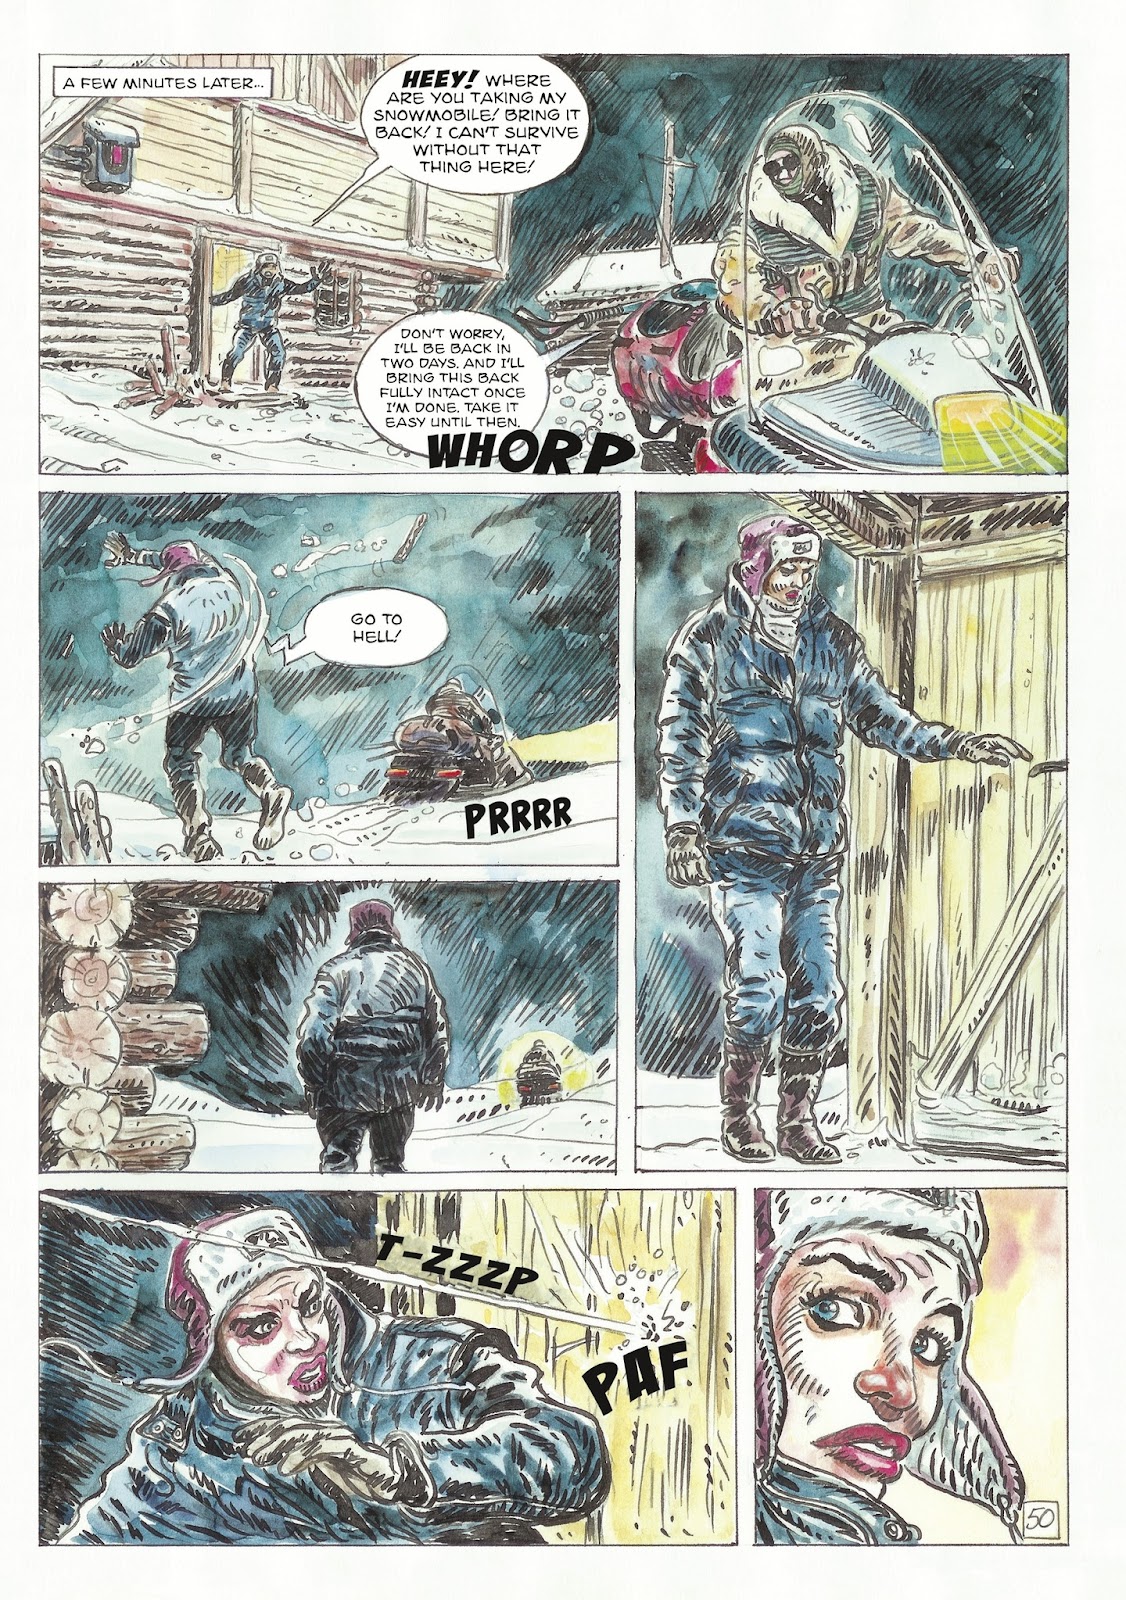 The Man With the Bear issue 1 - Page 52